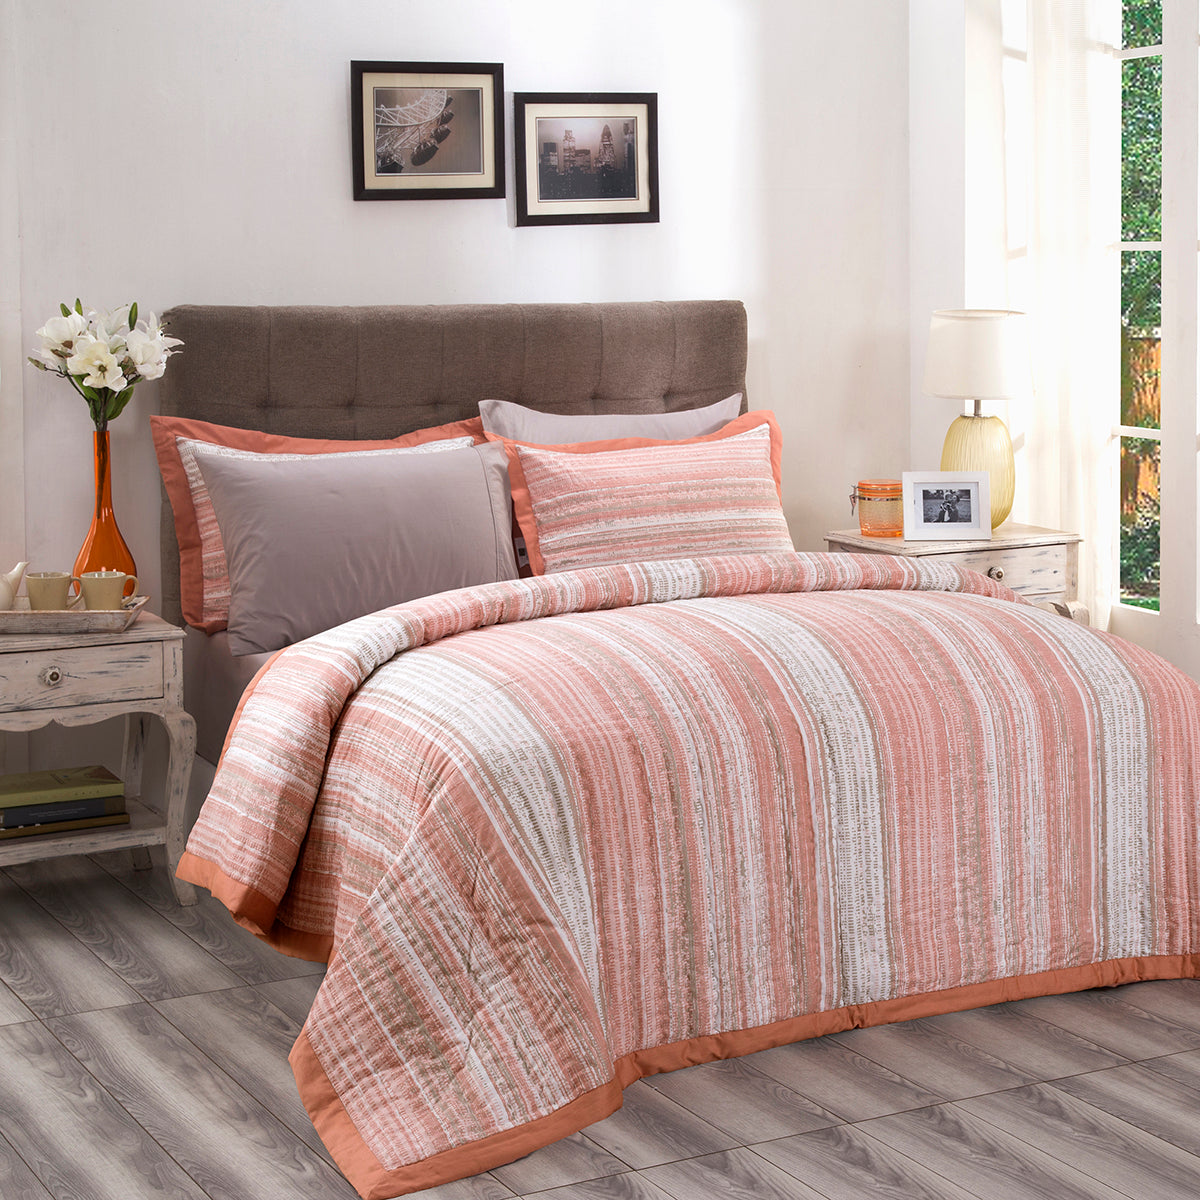 Patina Impression Rugged Stripes Hand Quilted Summer AC Quilt/Quilted Bed Cover/Comforter Peach